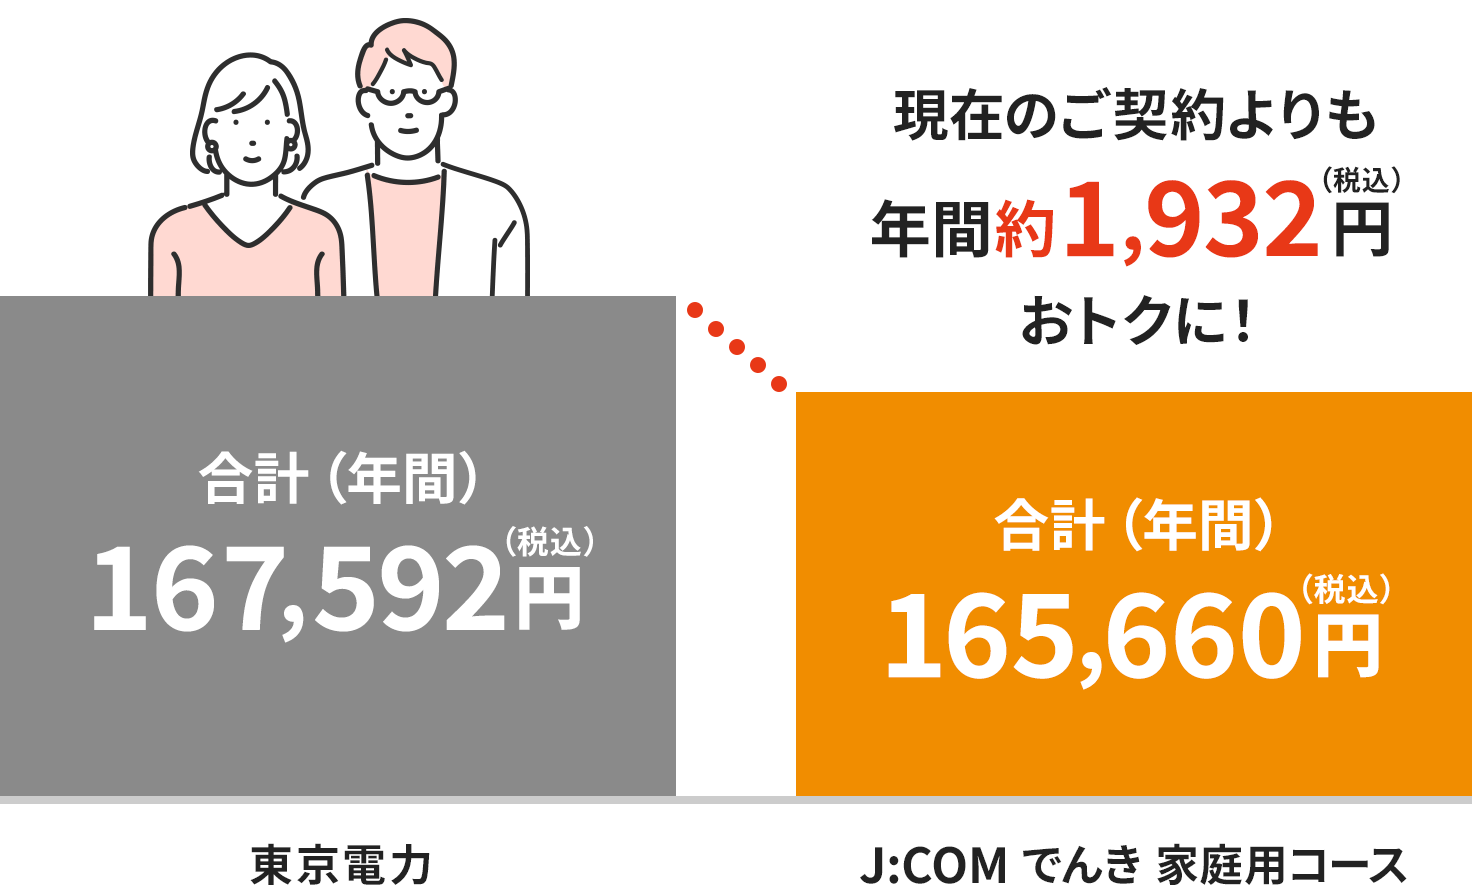 Illustration of discounts on electricity bills when you switch to J:COM DENRYOKU